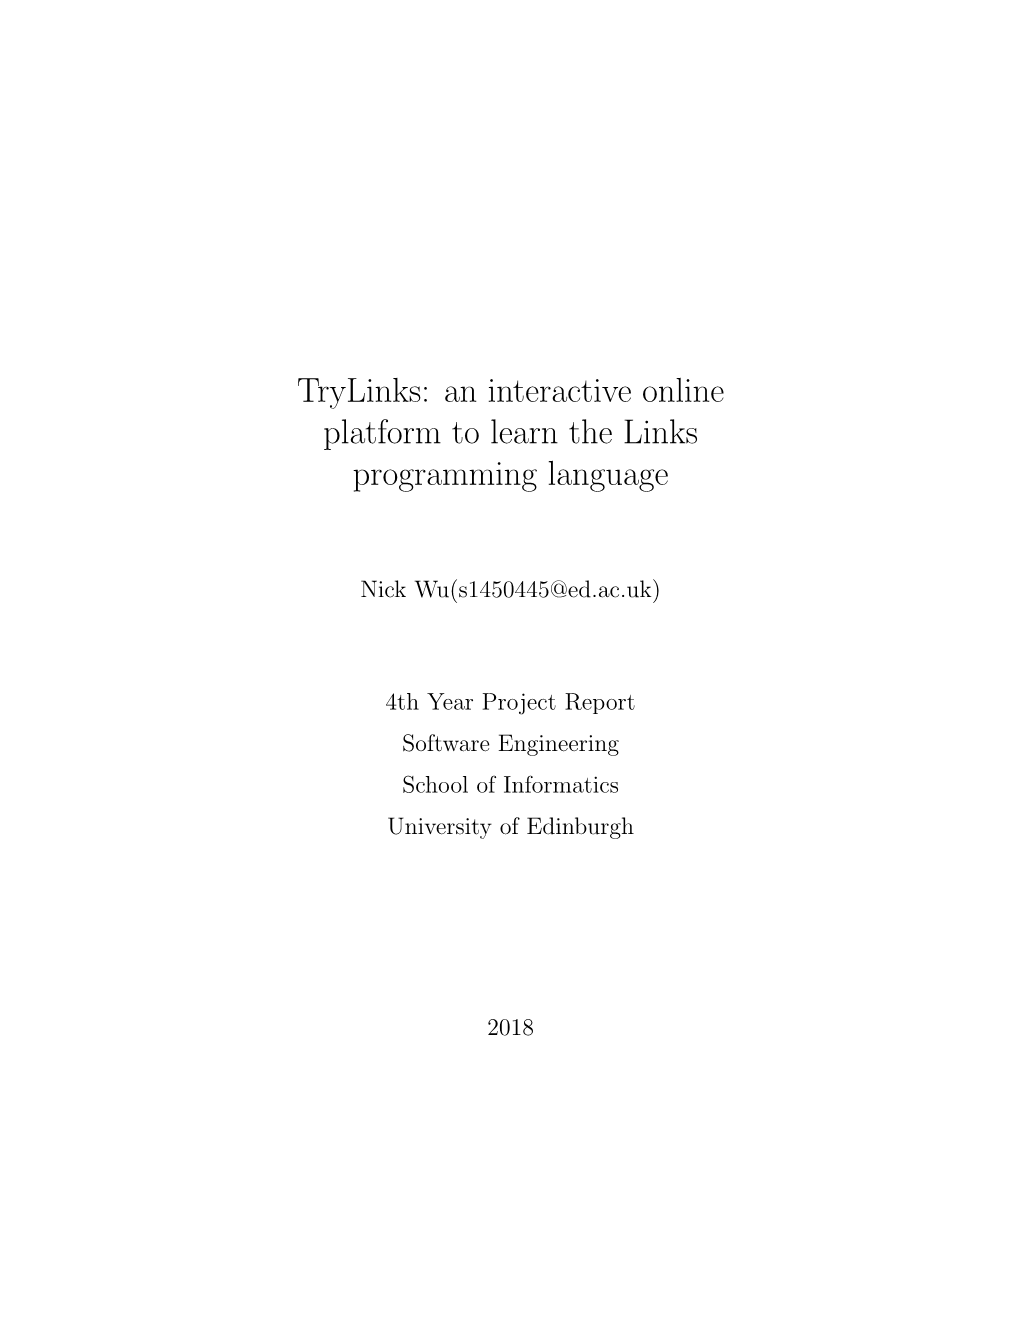 Trylinks: an Interactive Online Platform to Learn the Links Programming Language